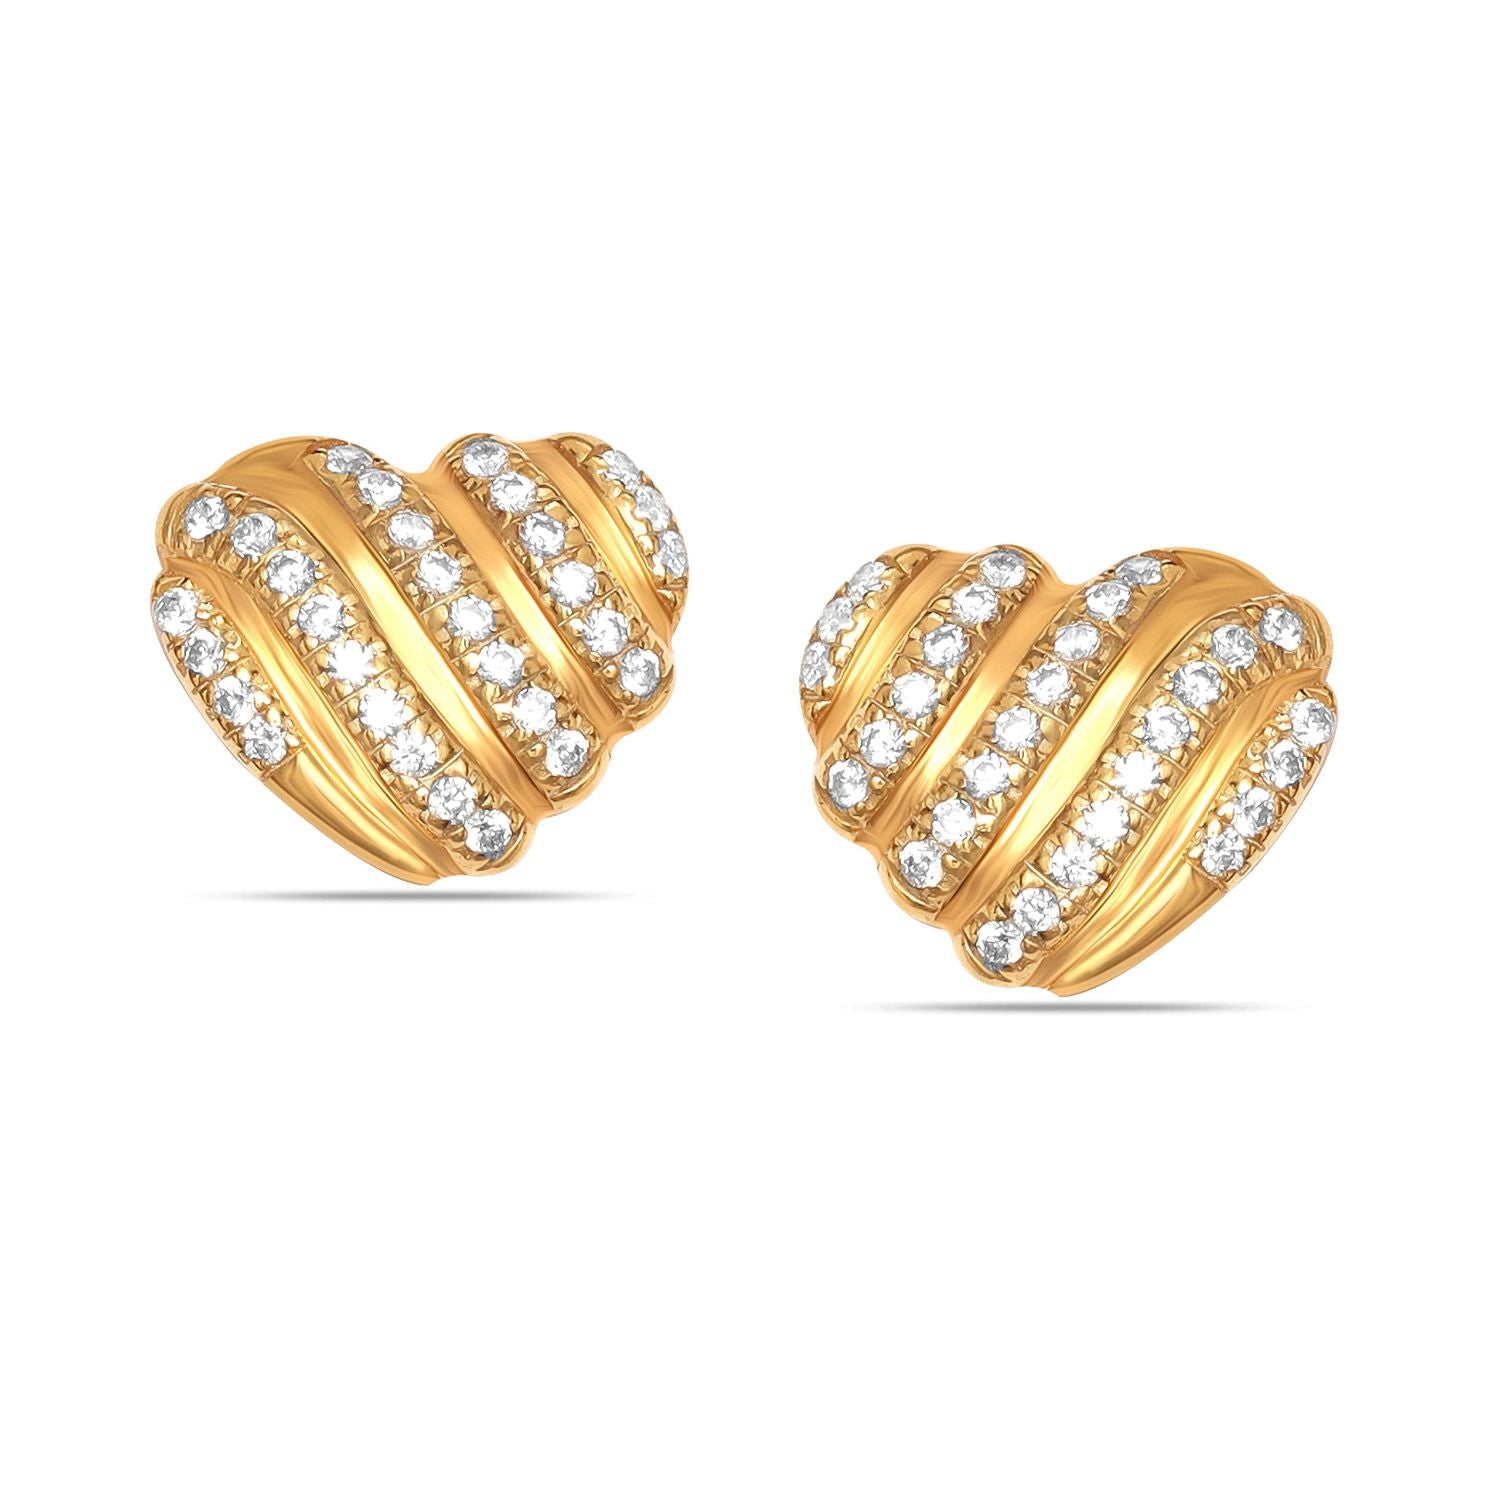 925 Sterling Silver 14K Gold Plated Heart with Pave CZ Stud Earring for Women Teen